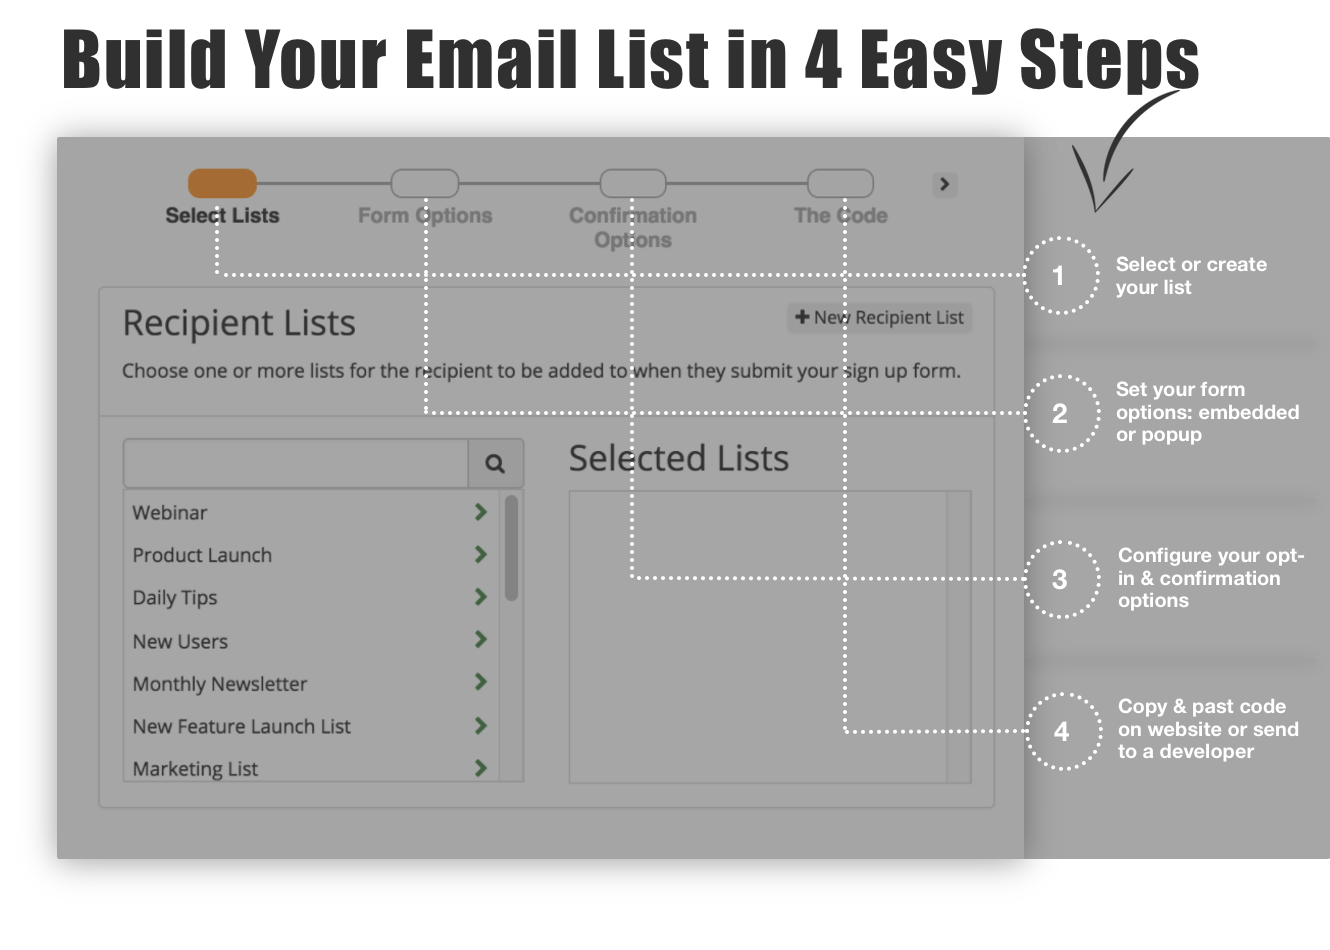 Build Your List in 4 Steps